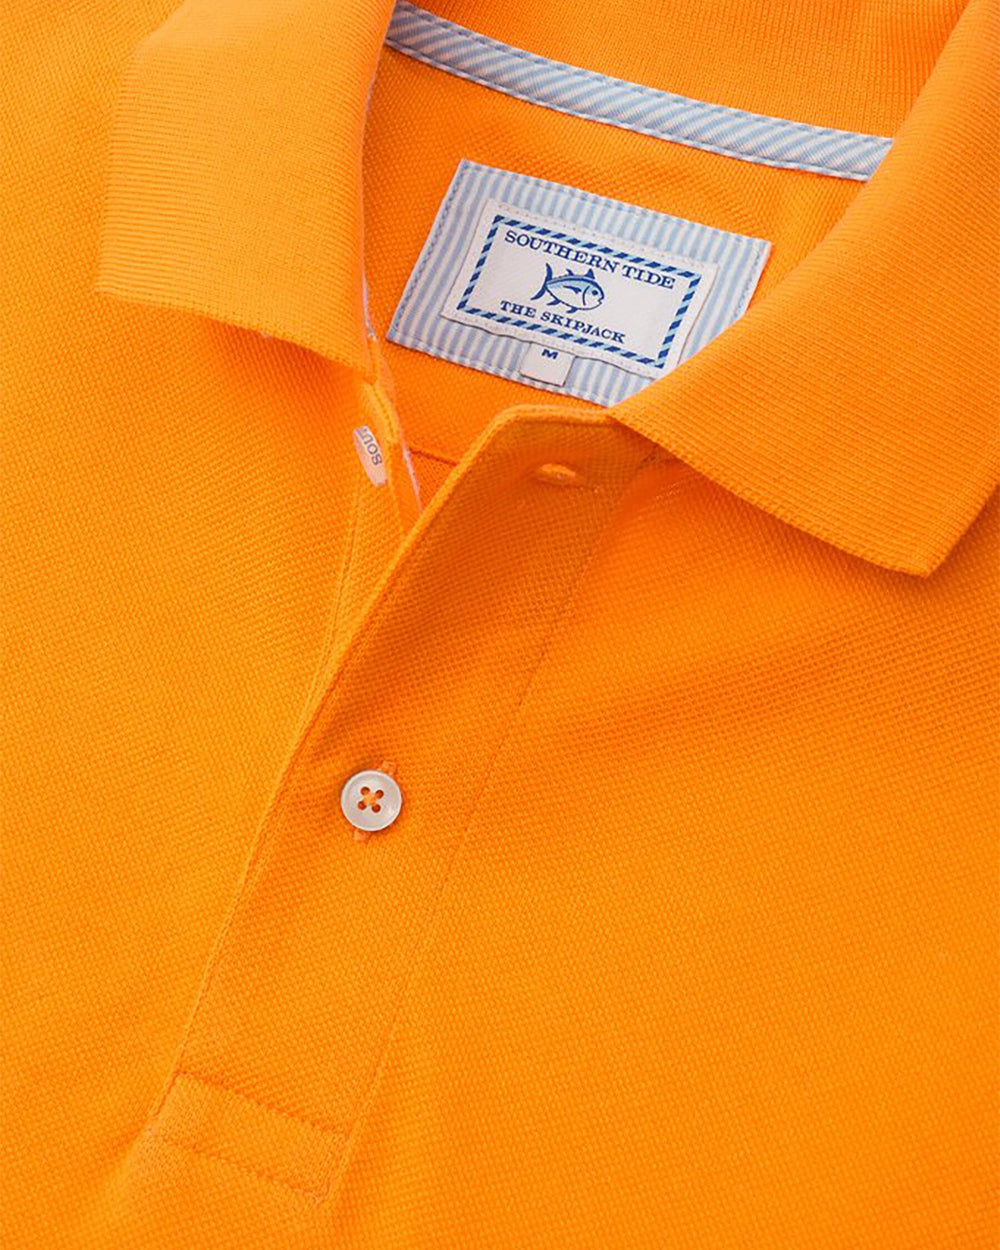 The detail view of the Men's Orange Skipjack Gameday Colors Polo Shirt by Southern Tide - Rocky Top Orange